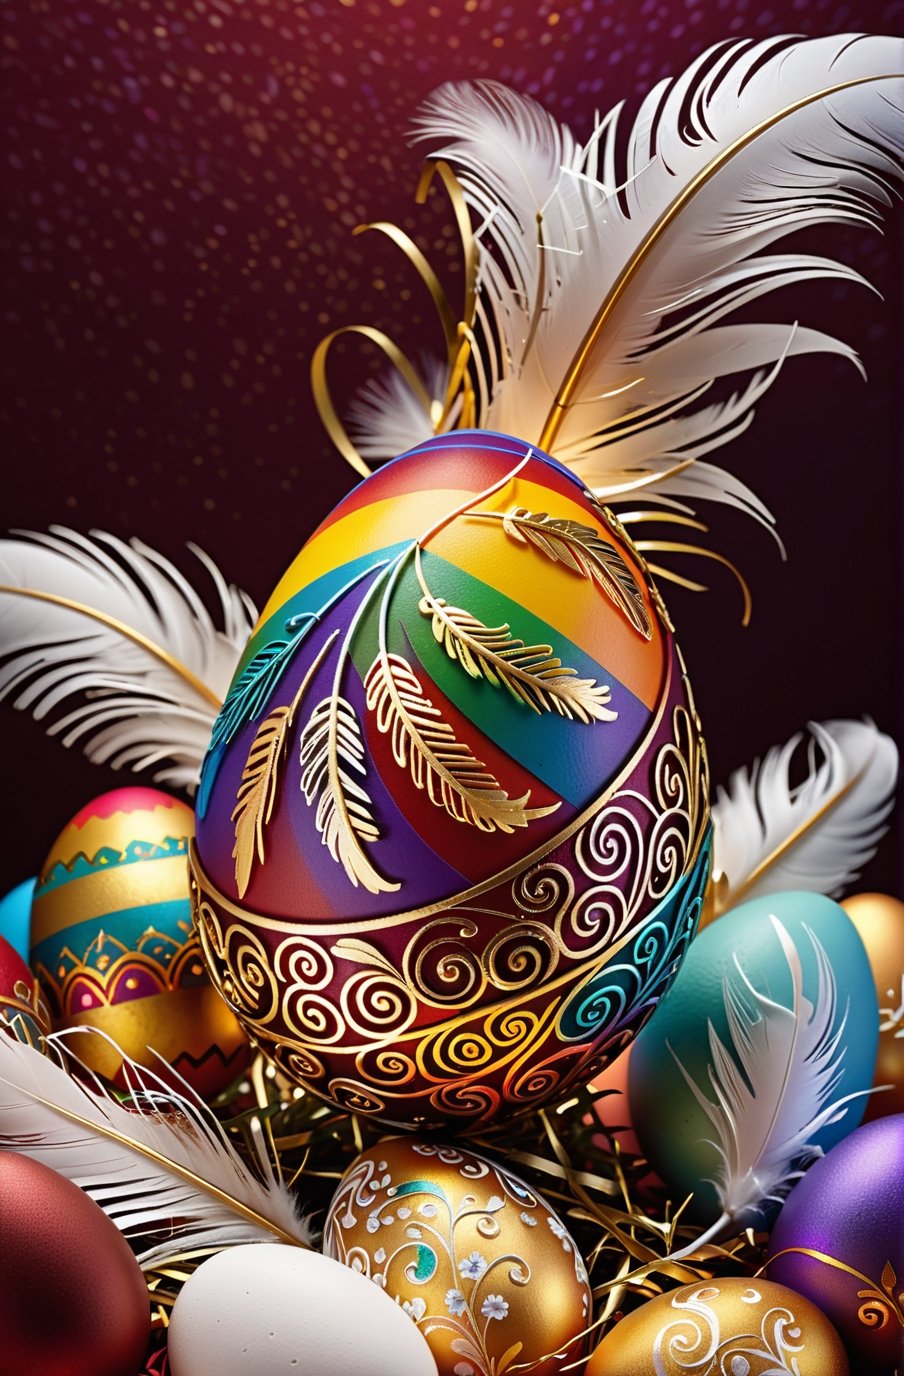 Easter eggs designed with arabesques and swirls using a harmonious mix of rainbow colors.
A pile of tiny golden twigs and many white feathers cover the egg from the bottom as if protecting it.
The egg shines even brighter due to the intense lighting that illuminates the egg on a dark red and golden background.

Ultra-clear, Ultra-detailed, ultra-realistic, ultra-close up